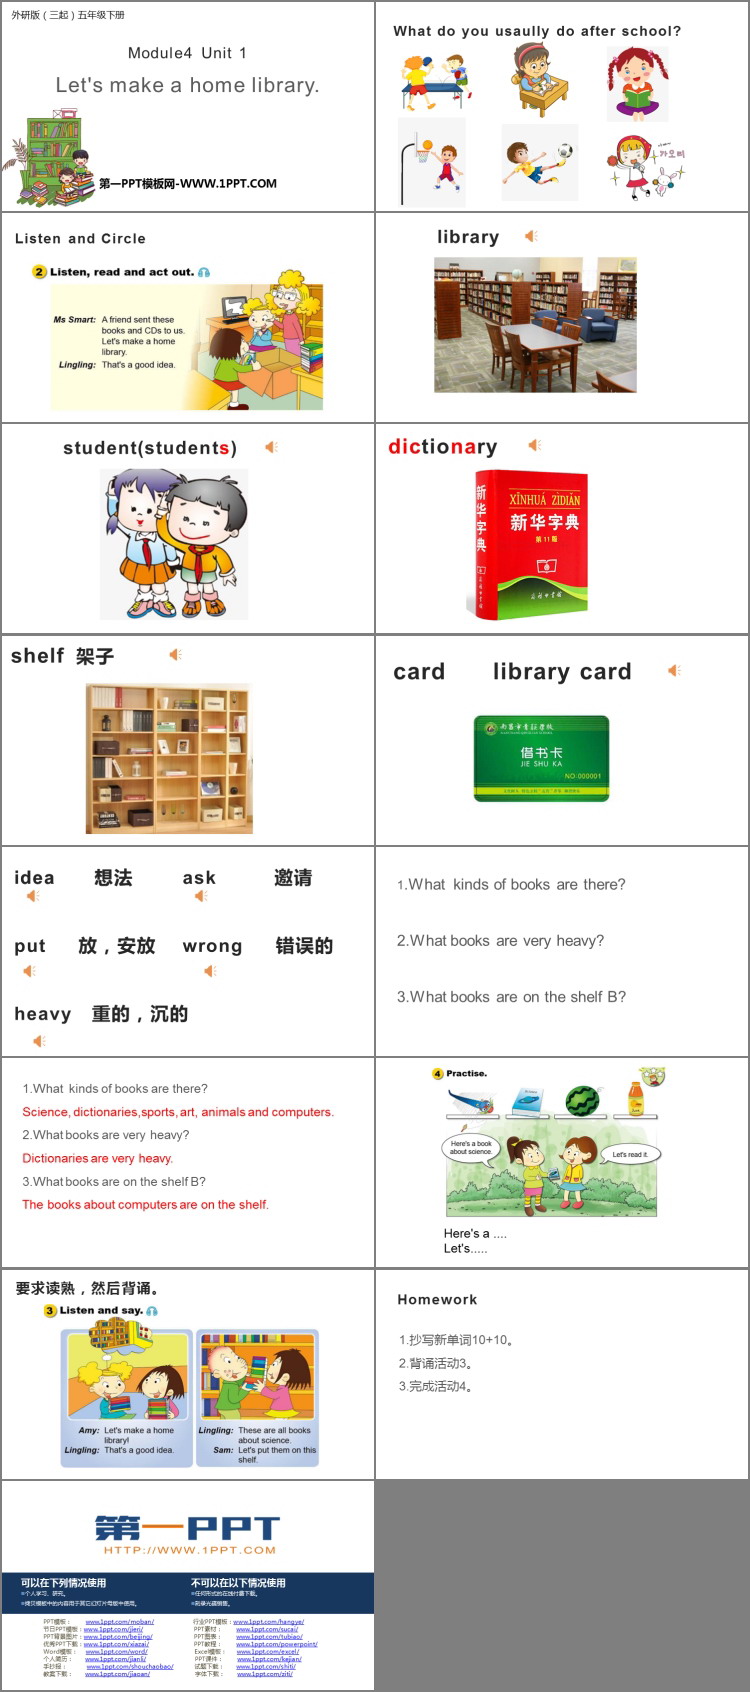 《Let's make a home library》PPT免费课件-预览图02